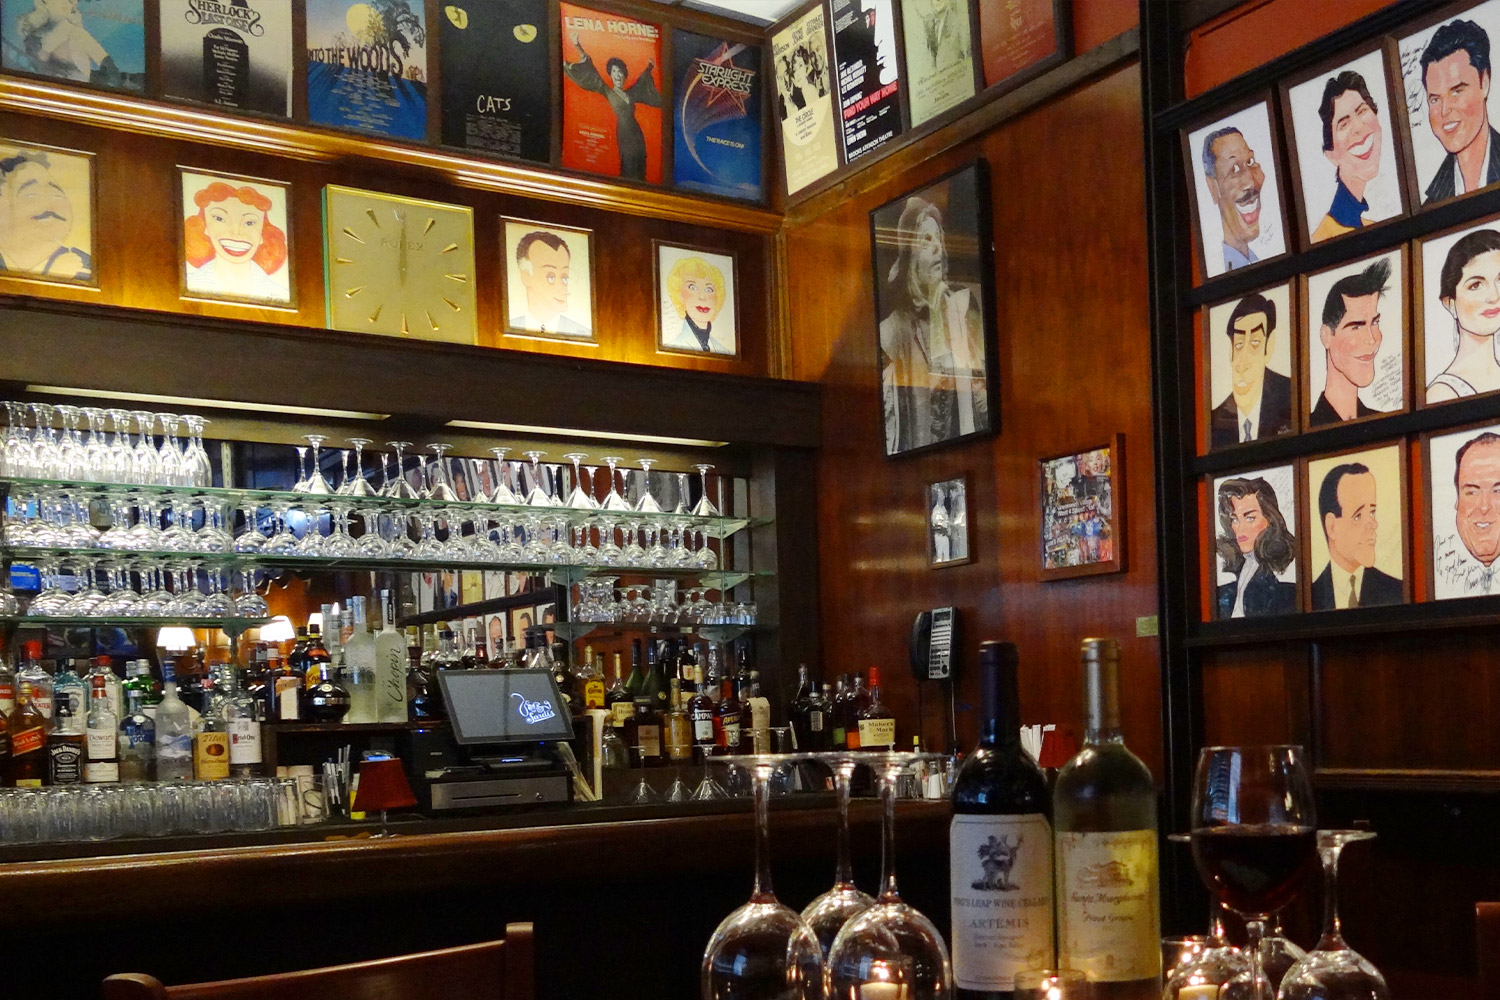 Corner of Sardi's bar showing caricatures on the wall, glasses lining the mirrored wall and wine bottles